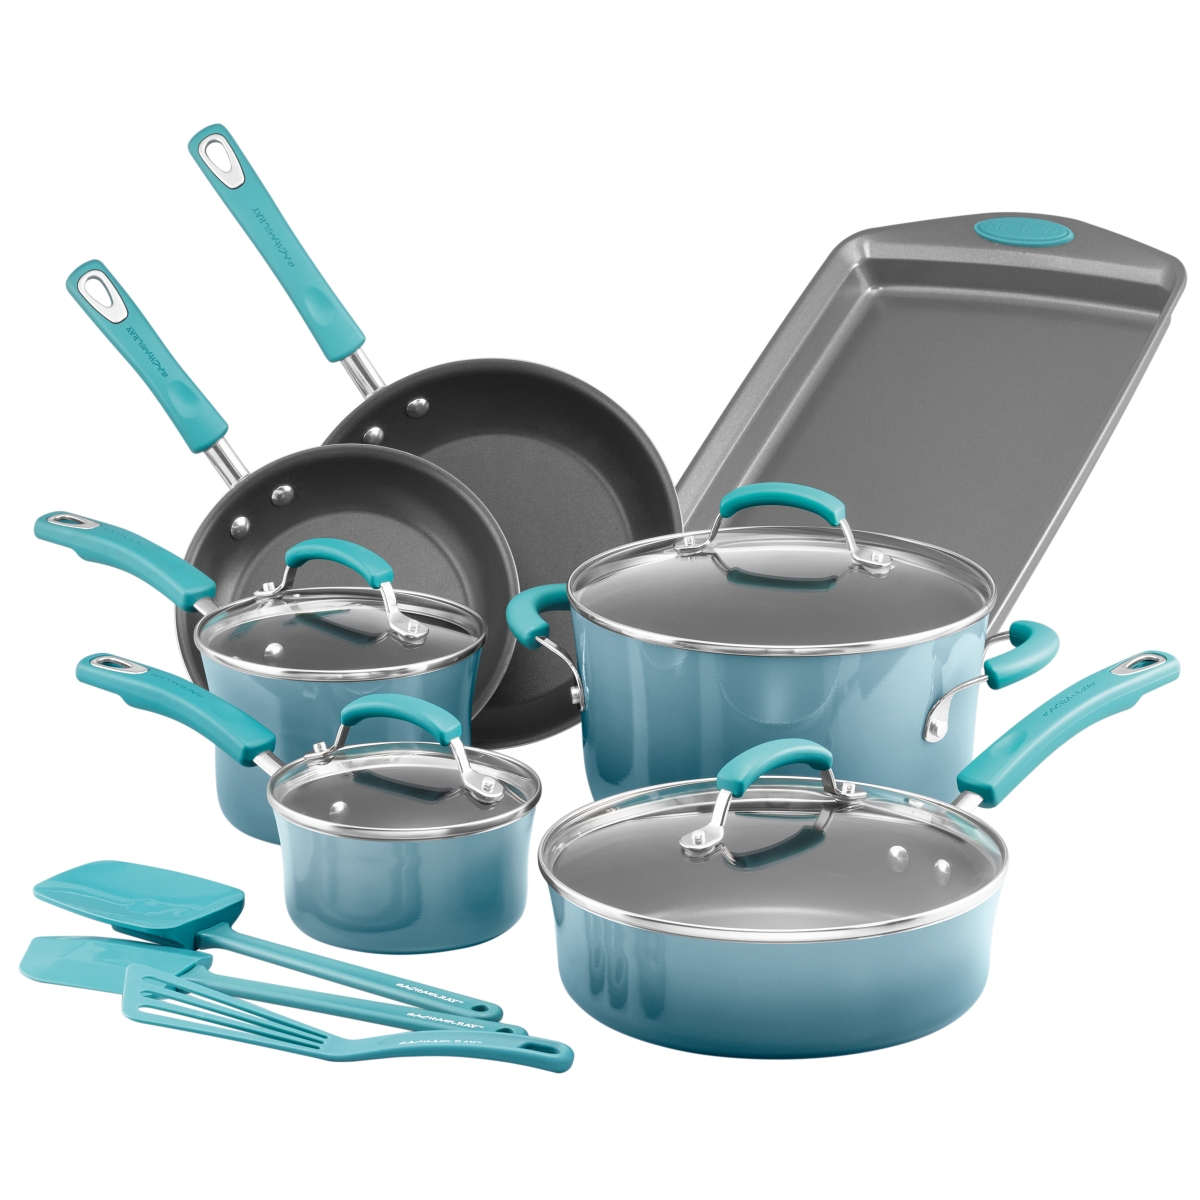 19020 Classic Brights Porcelain Nonstick 14 Piece Cookware Set With Bakeware & Tools, Agave Blue